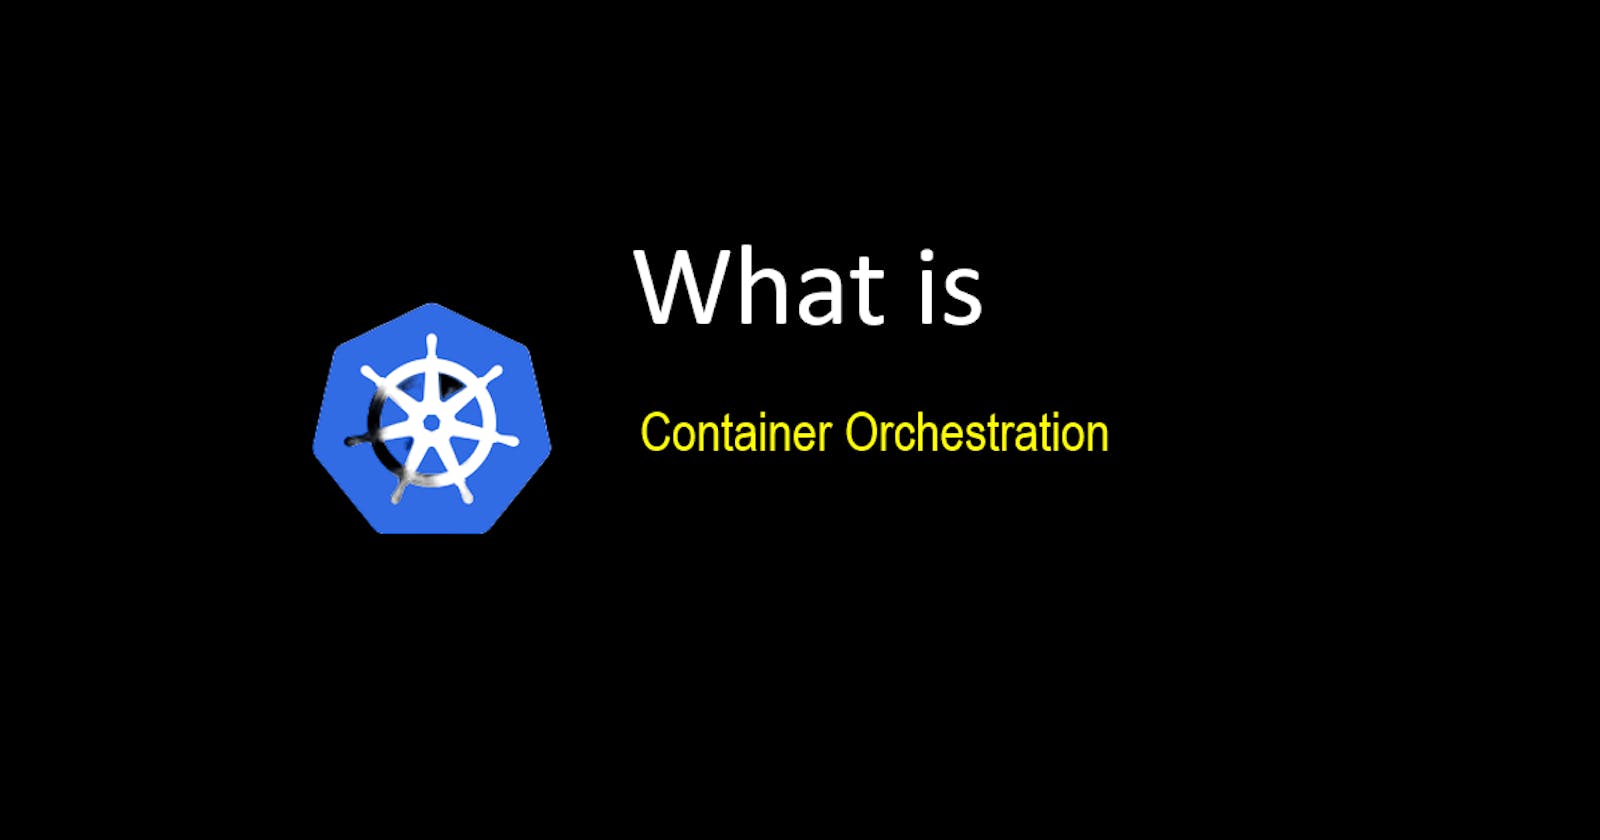 Kubernetes Overview - Container Orchestration